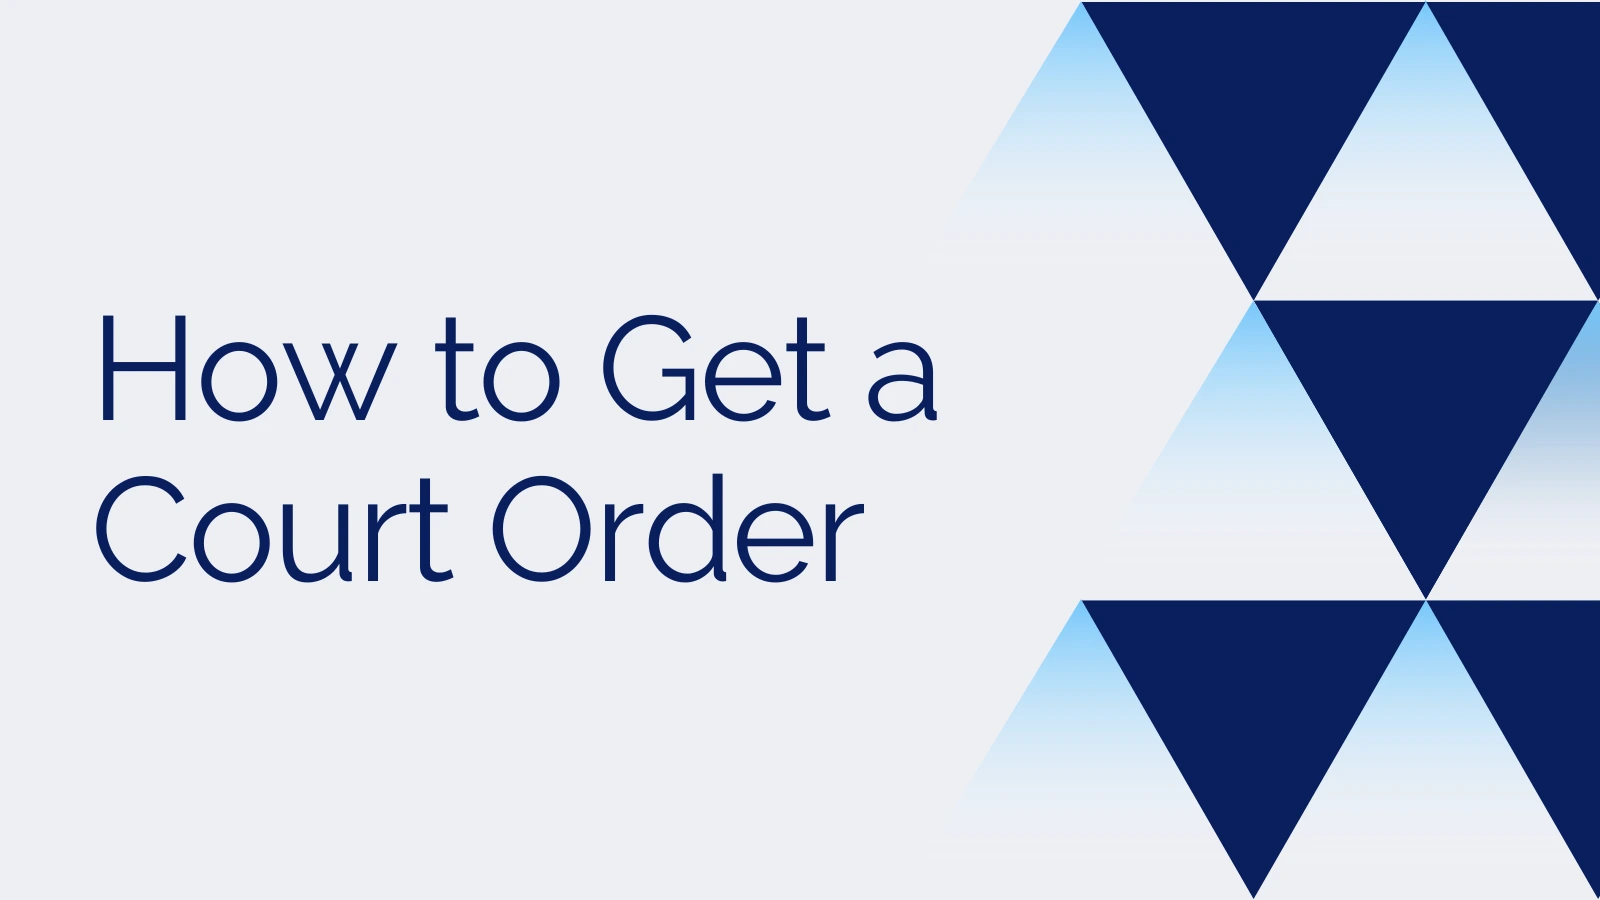 How to Get a Court Order